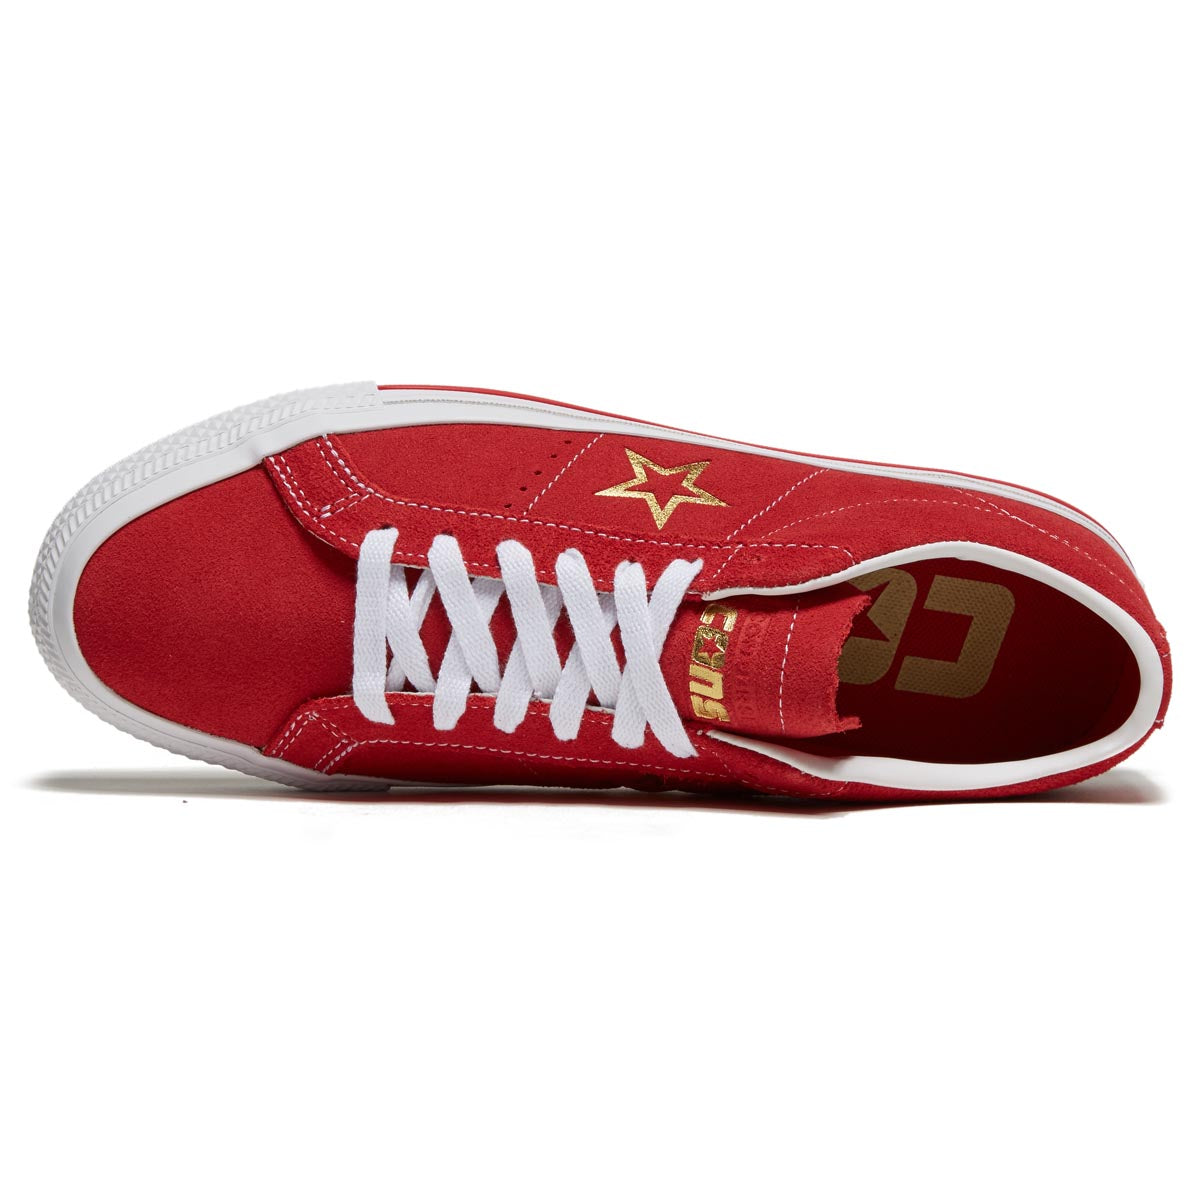 Converse One Star Pro Suede Ox Shoes - Varsity Red/White/Gold image 3